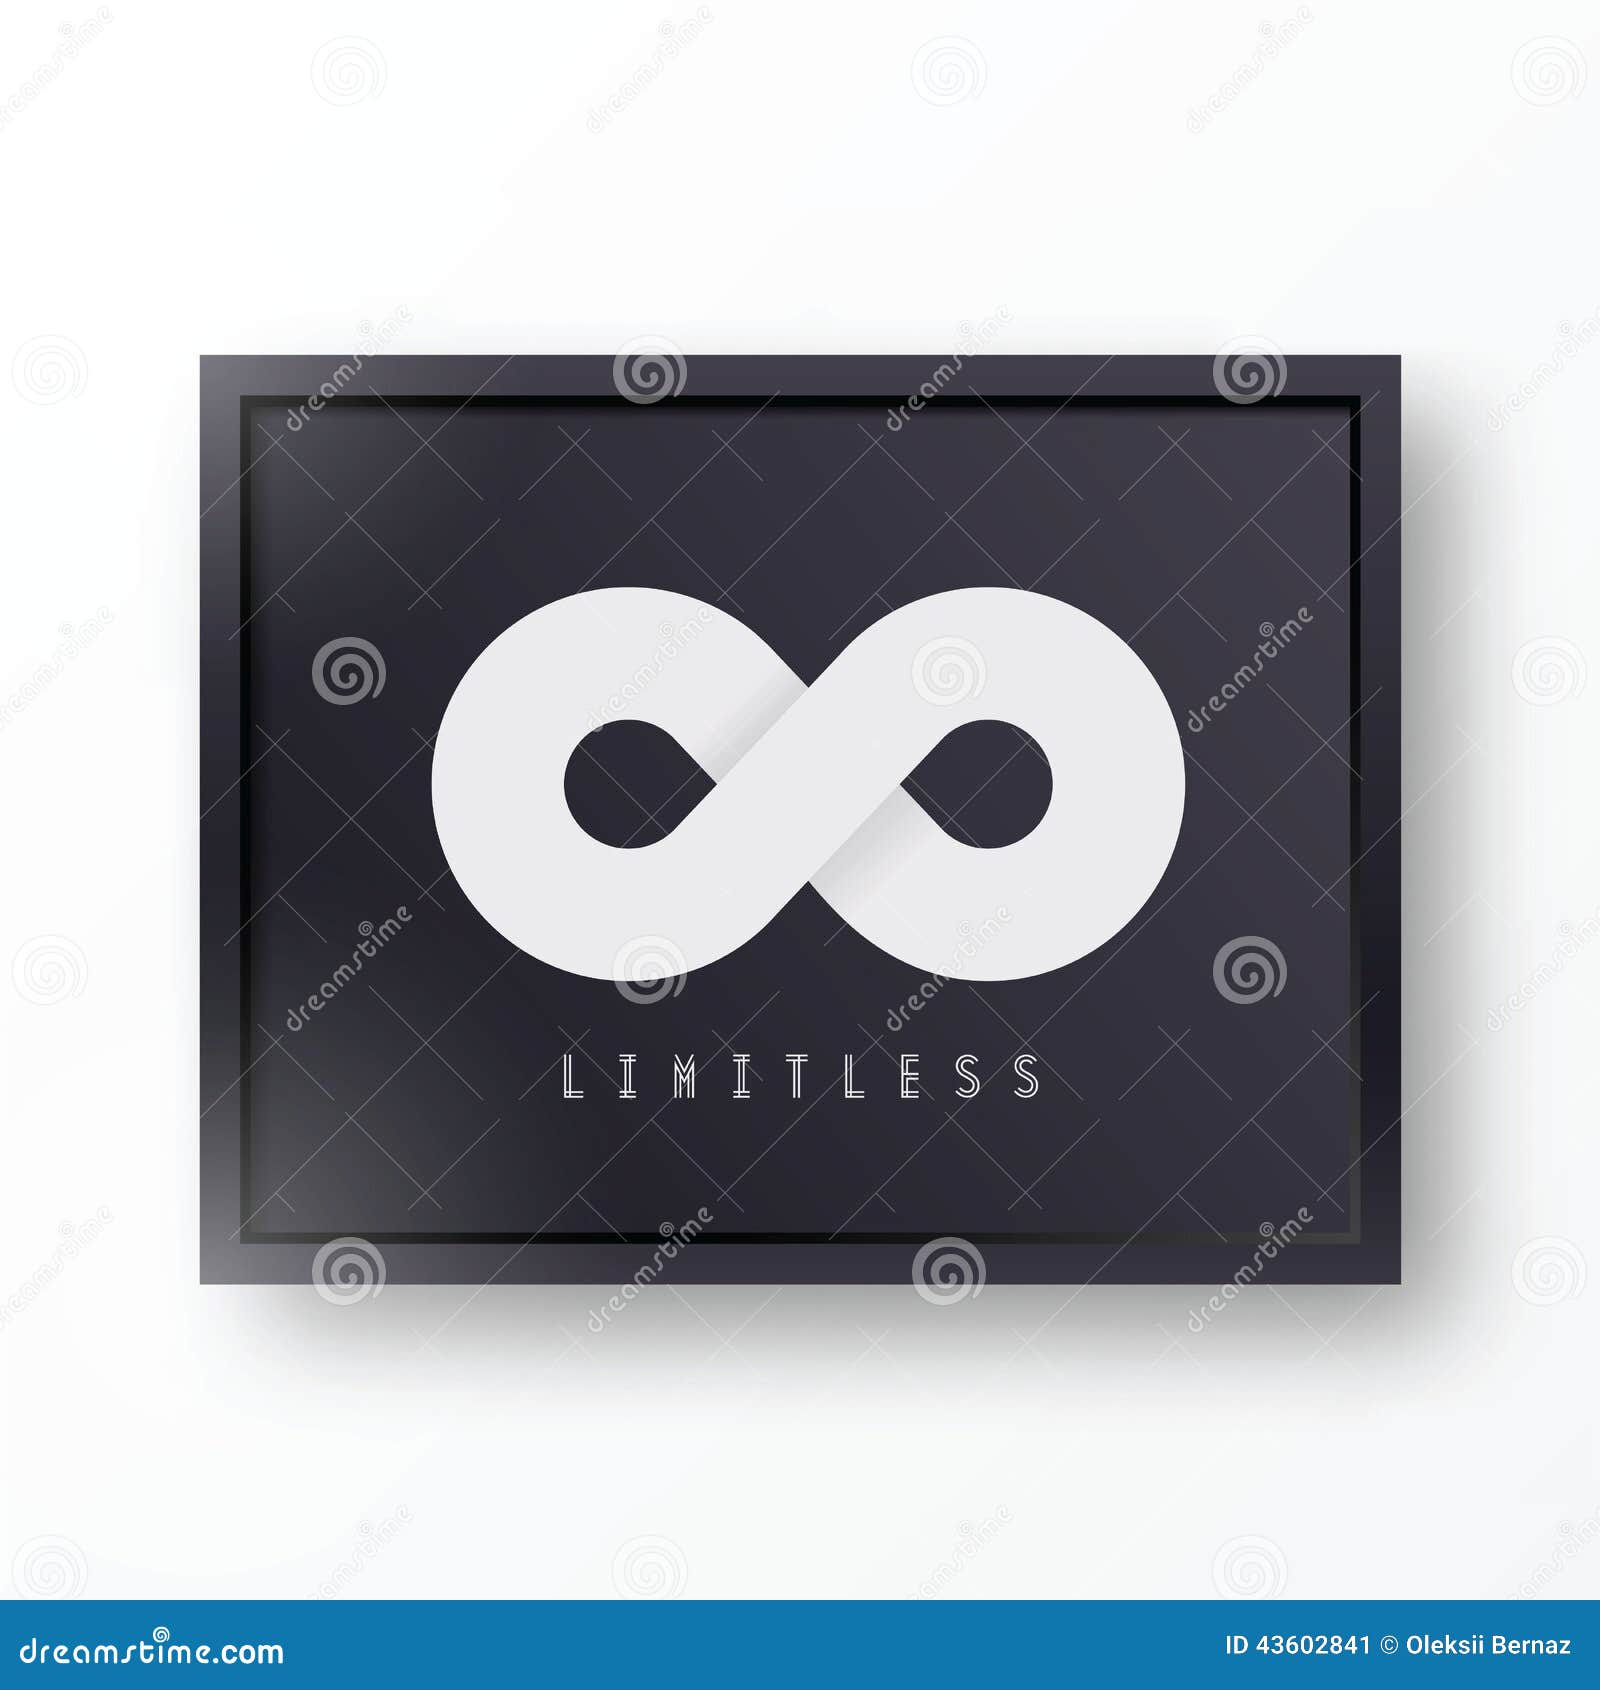 limitless abstract   icon or logo in